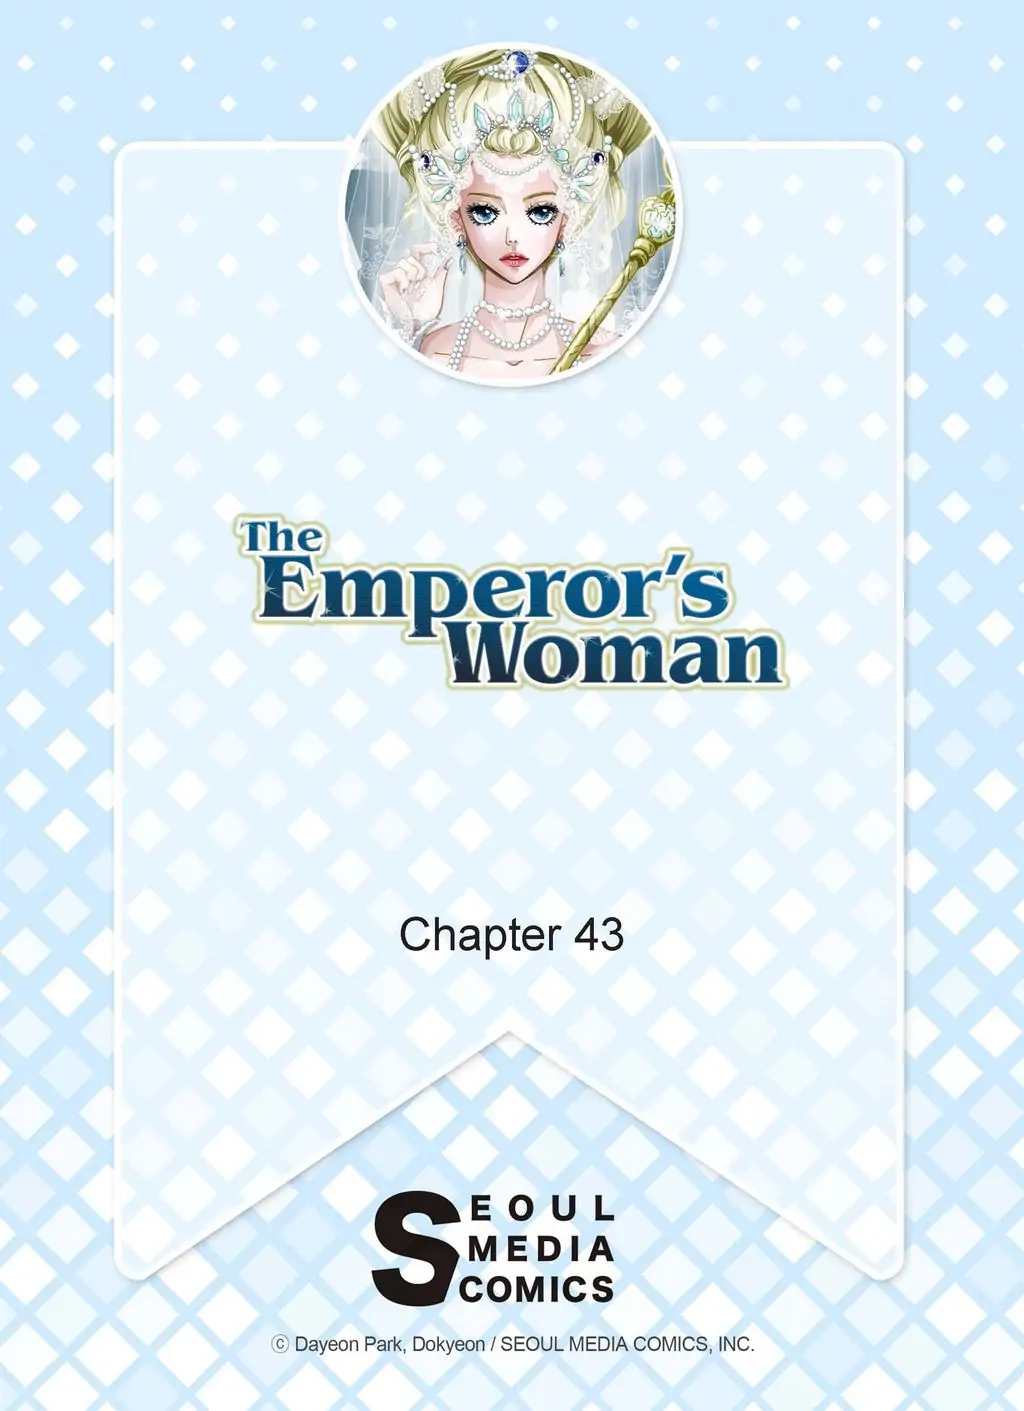 The Emperor’s Woman chapter 43